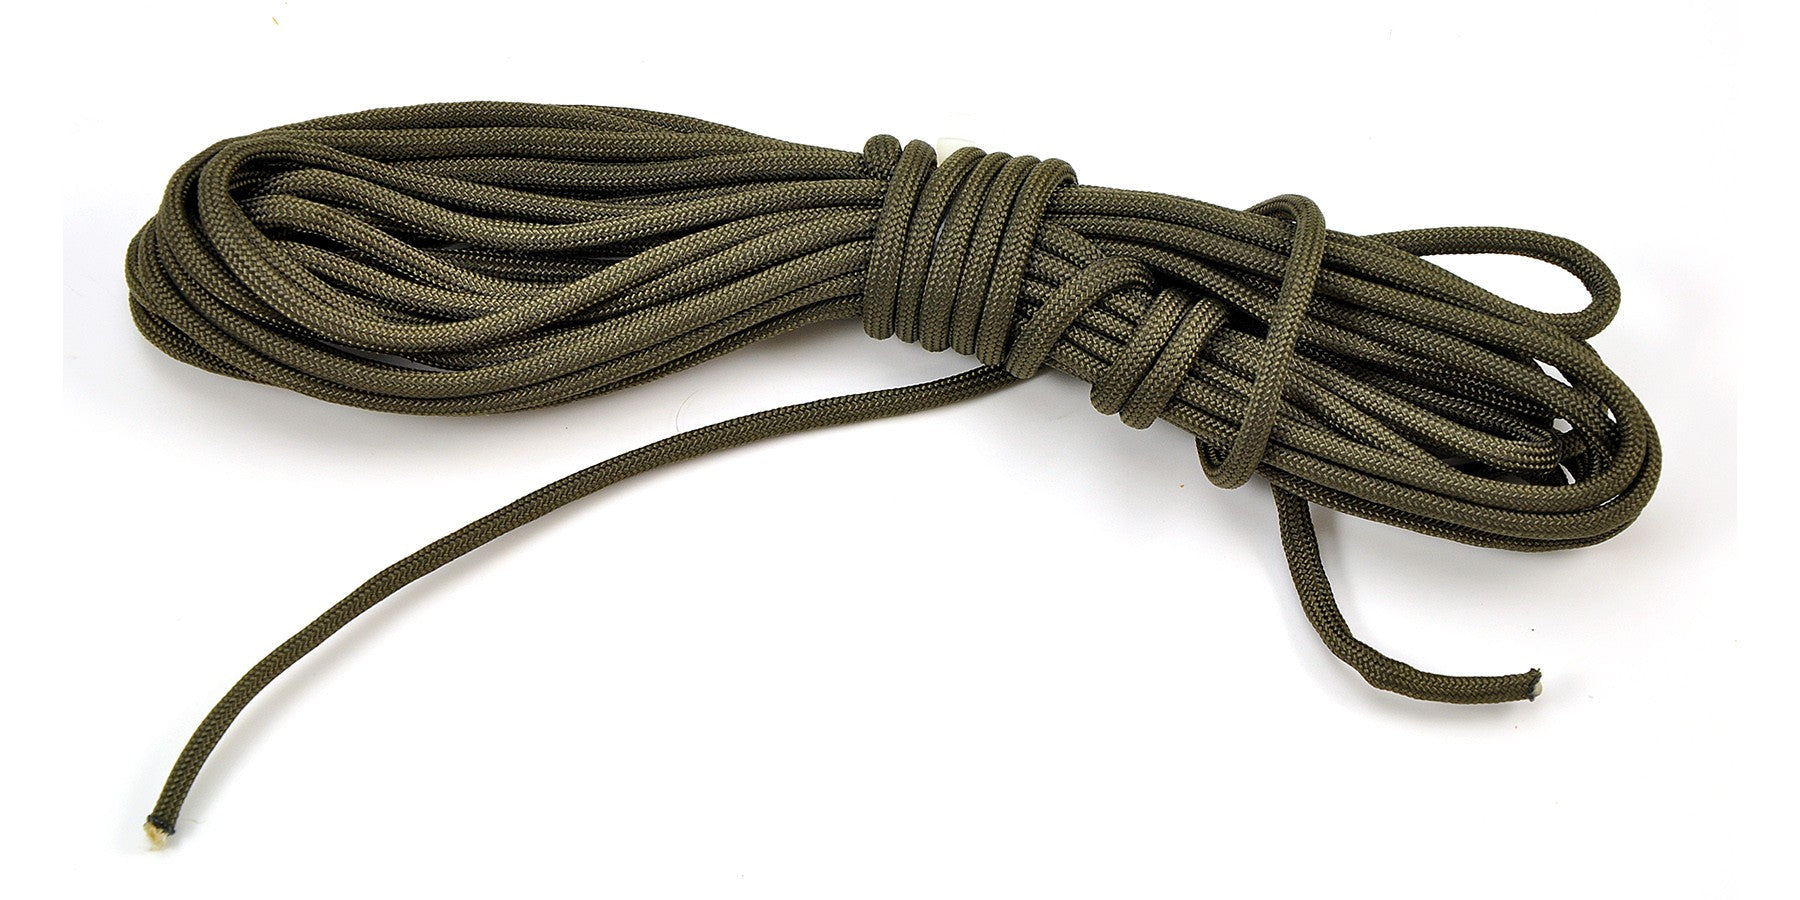 Office, 51 9 Yards 2mm Paracord Parachute Cord